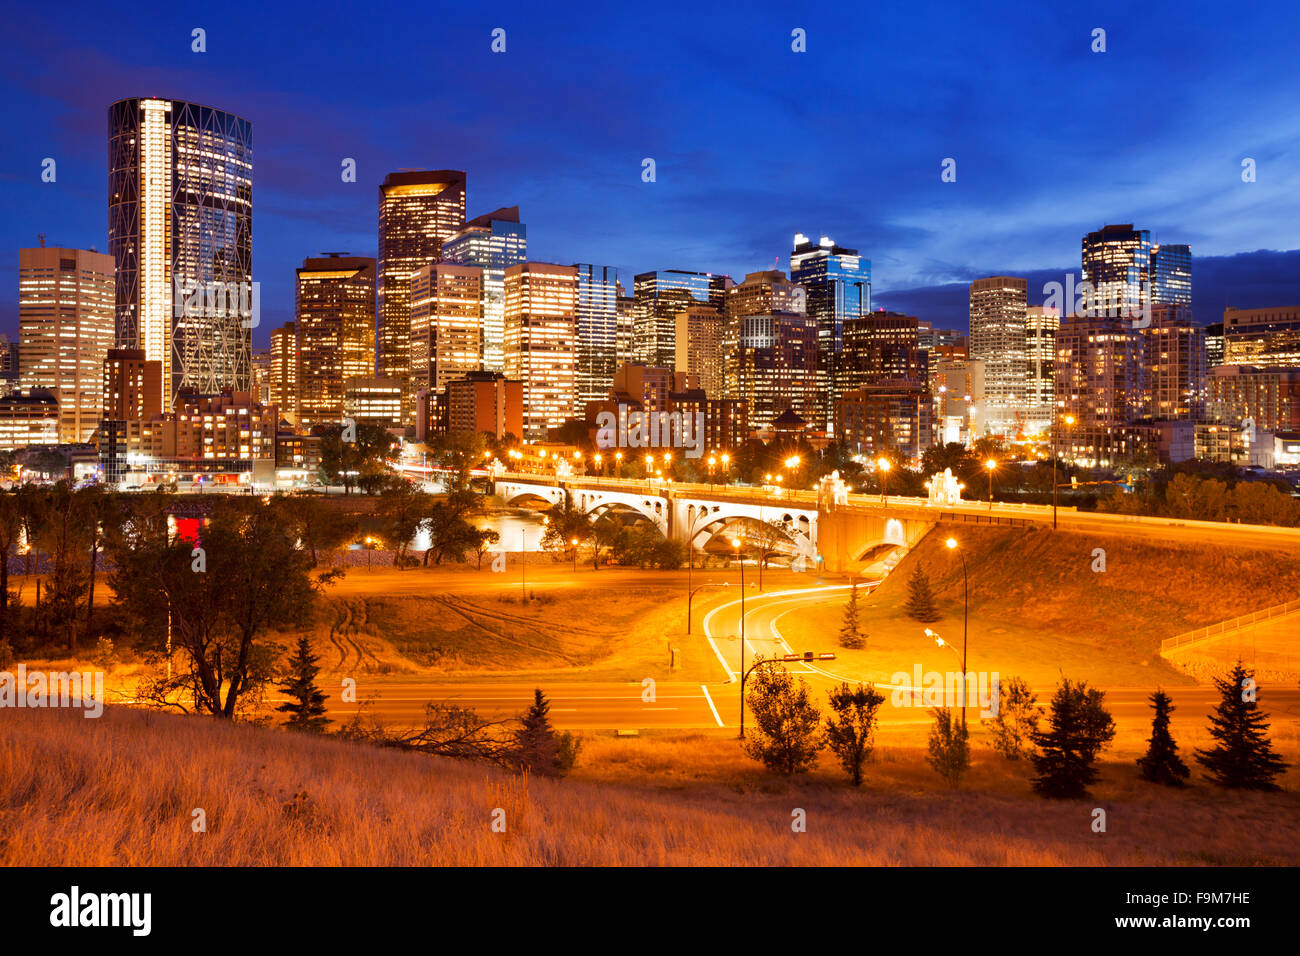 The skyline of downtown Calgary, Alberta, Canada, photographed at dusk. Stock Photo